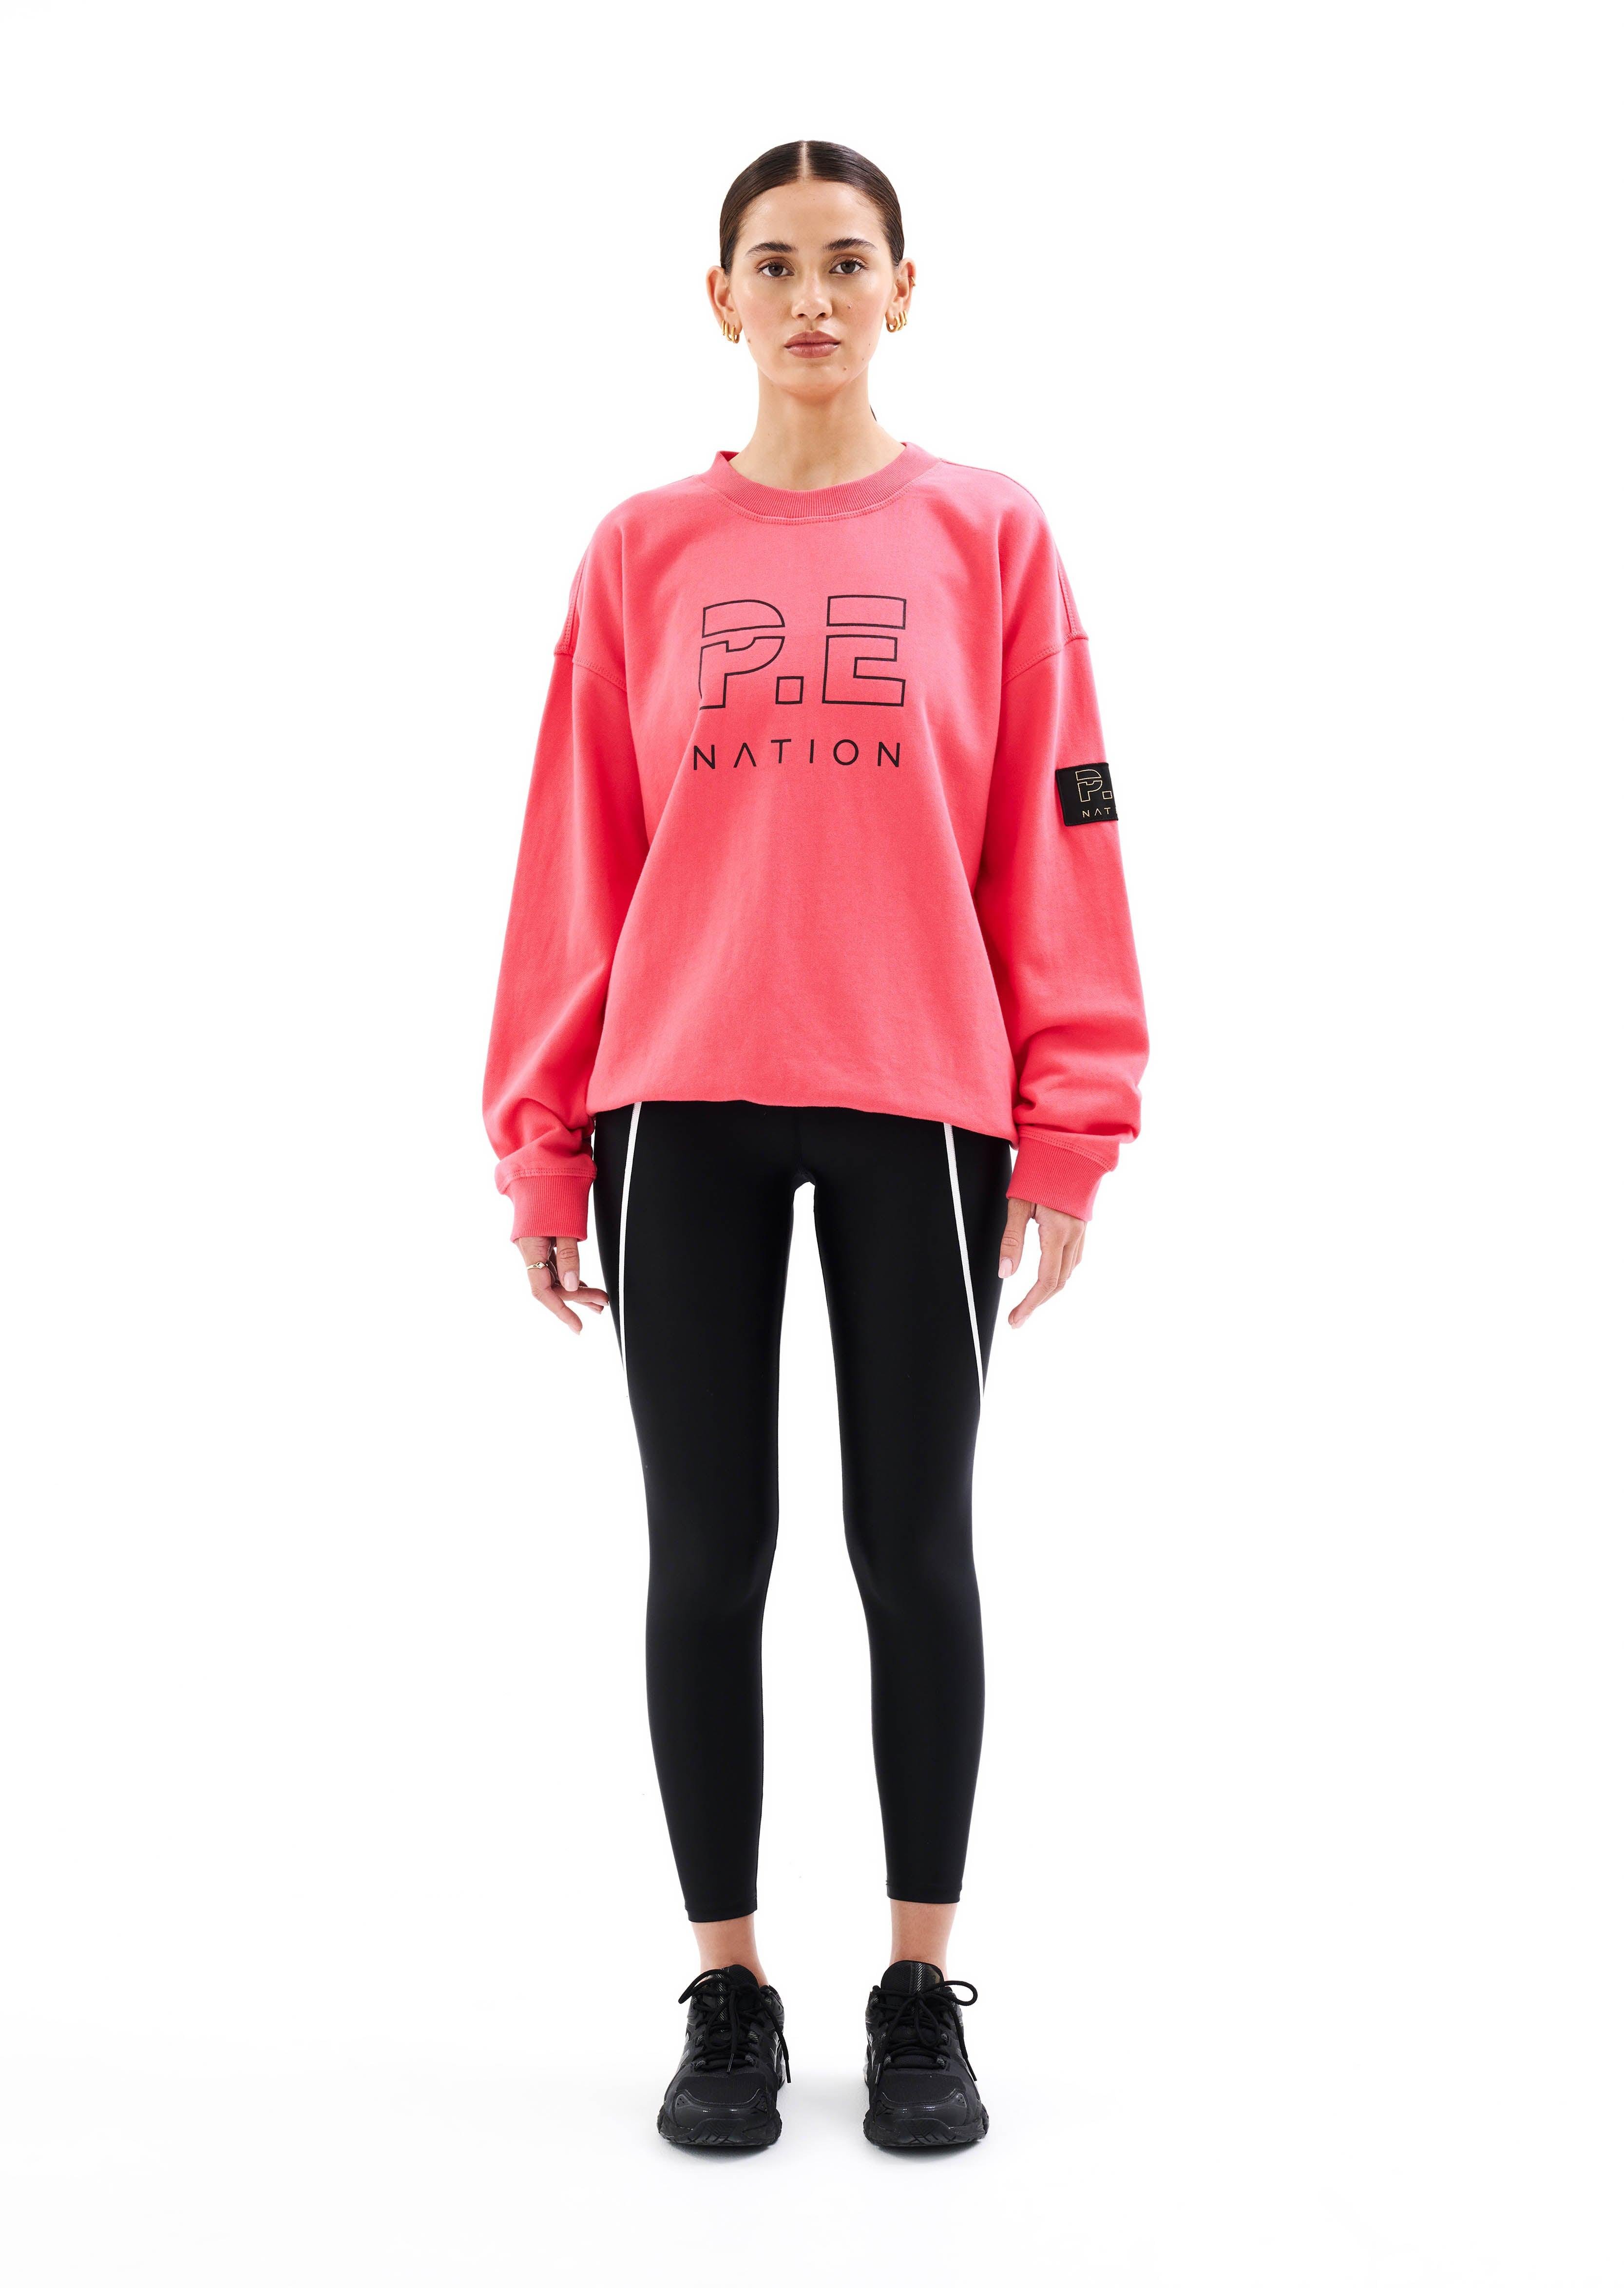 HEADS UP SWEAT IN DIVA PINK by P.E NATION